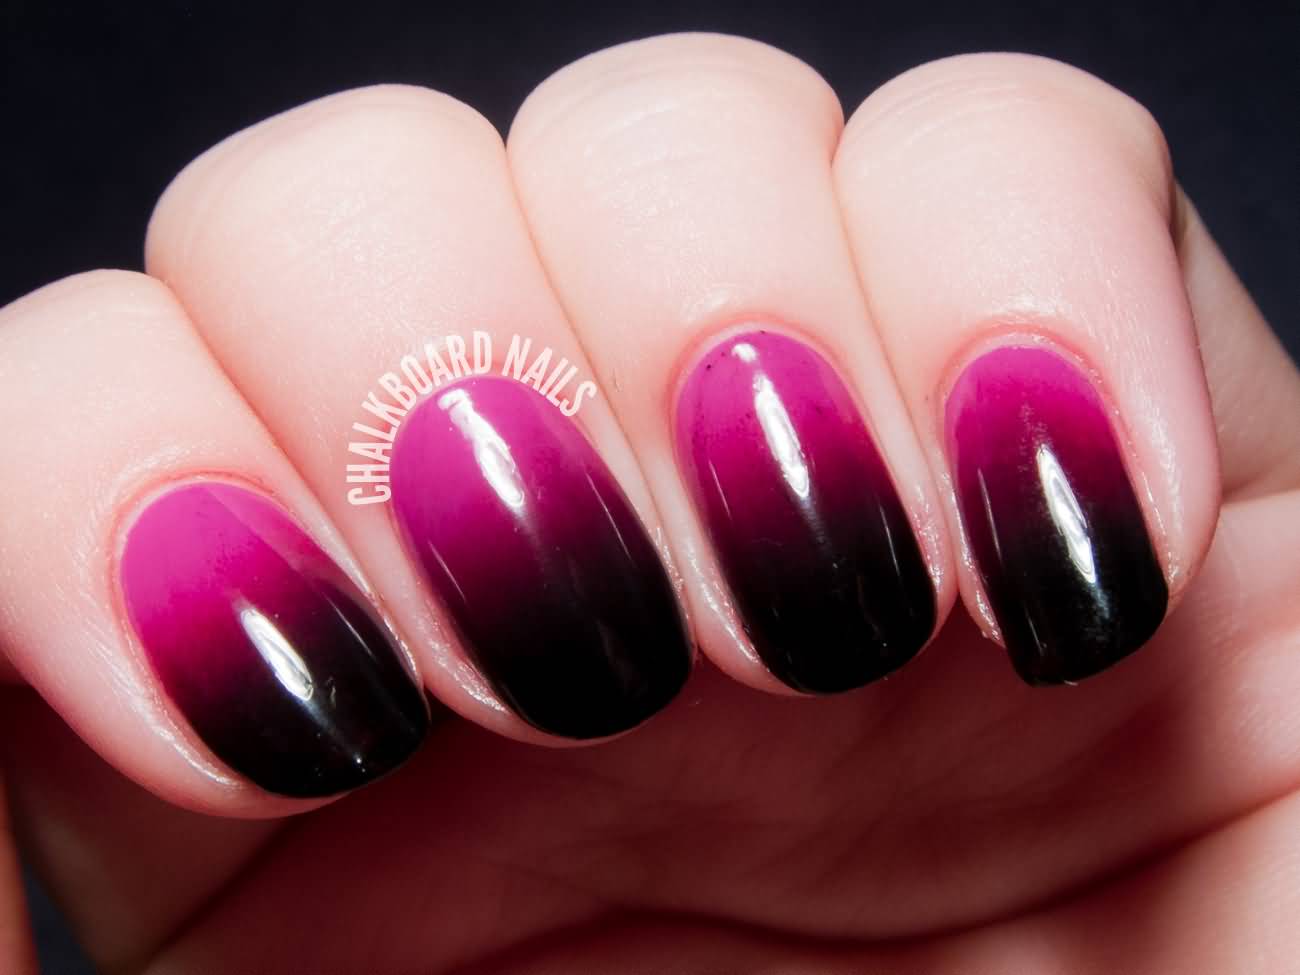 2. "Black and Pink Ombre Nail Art" - wide 1